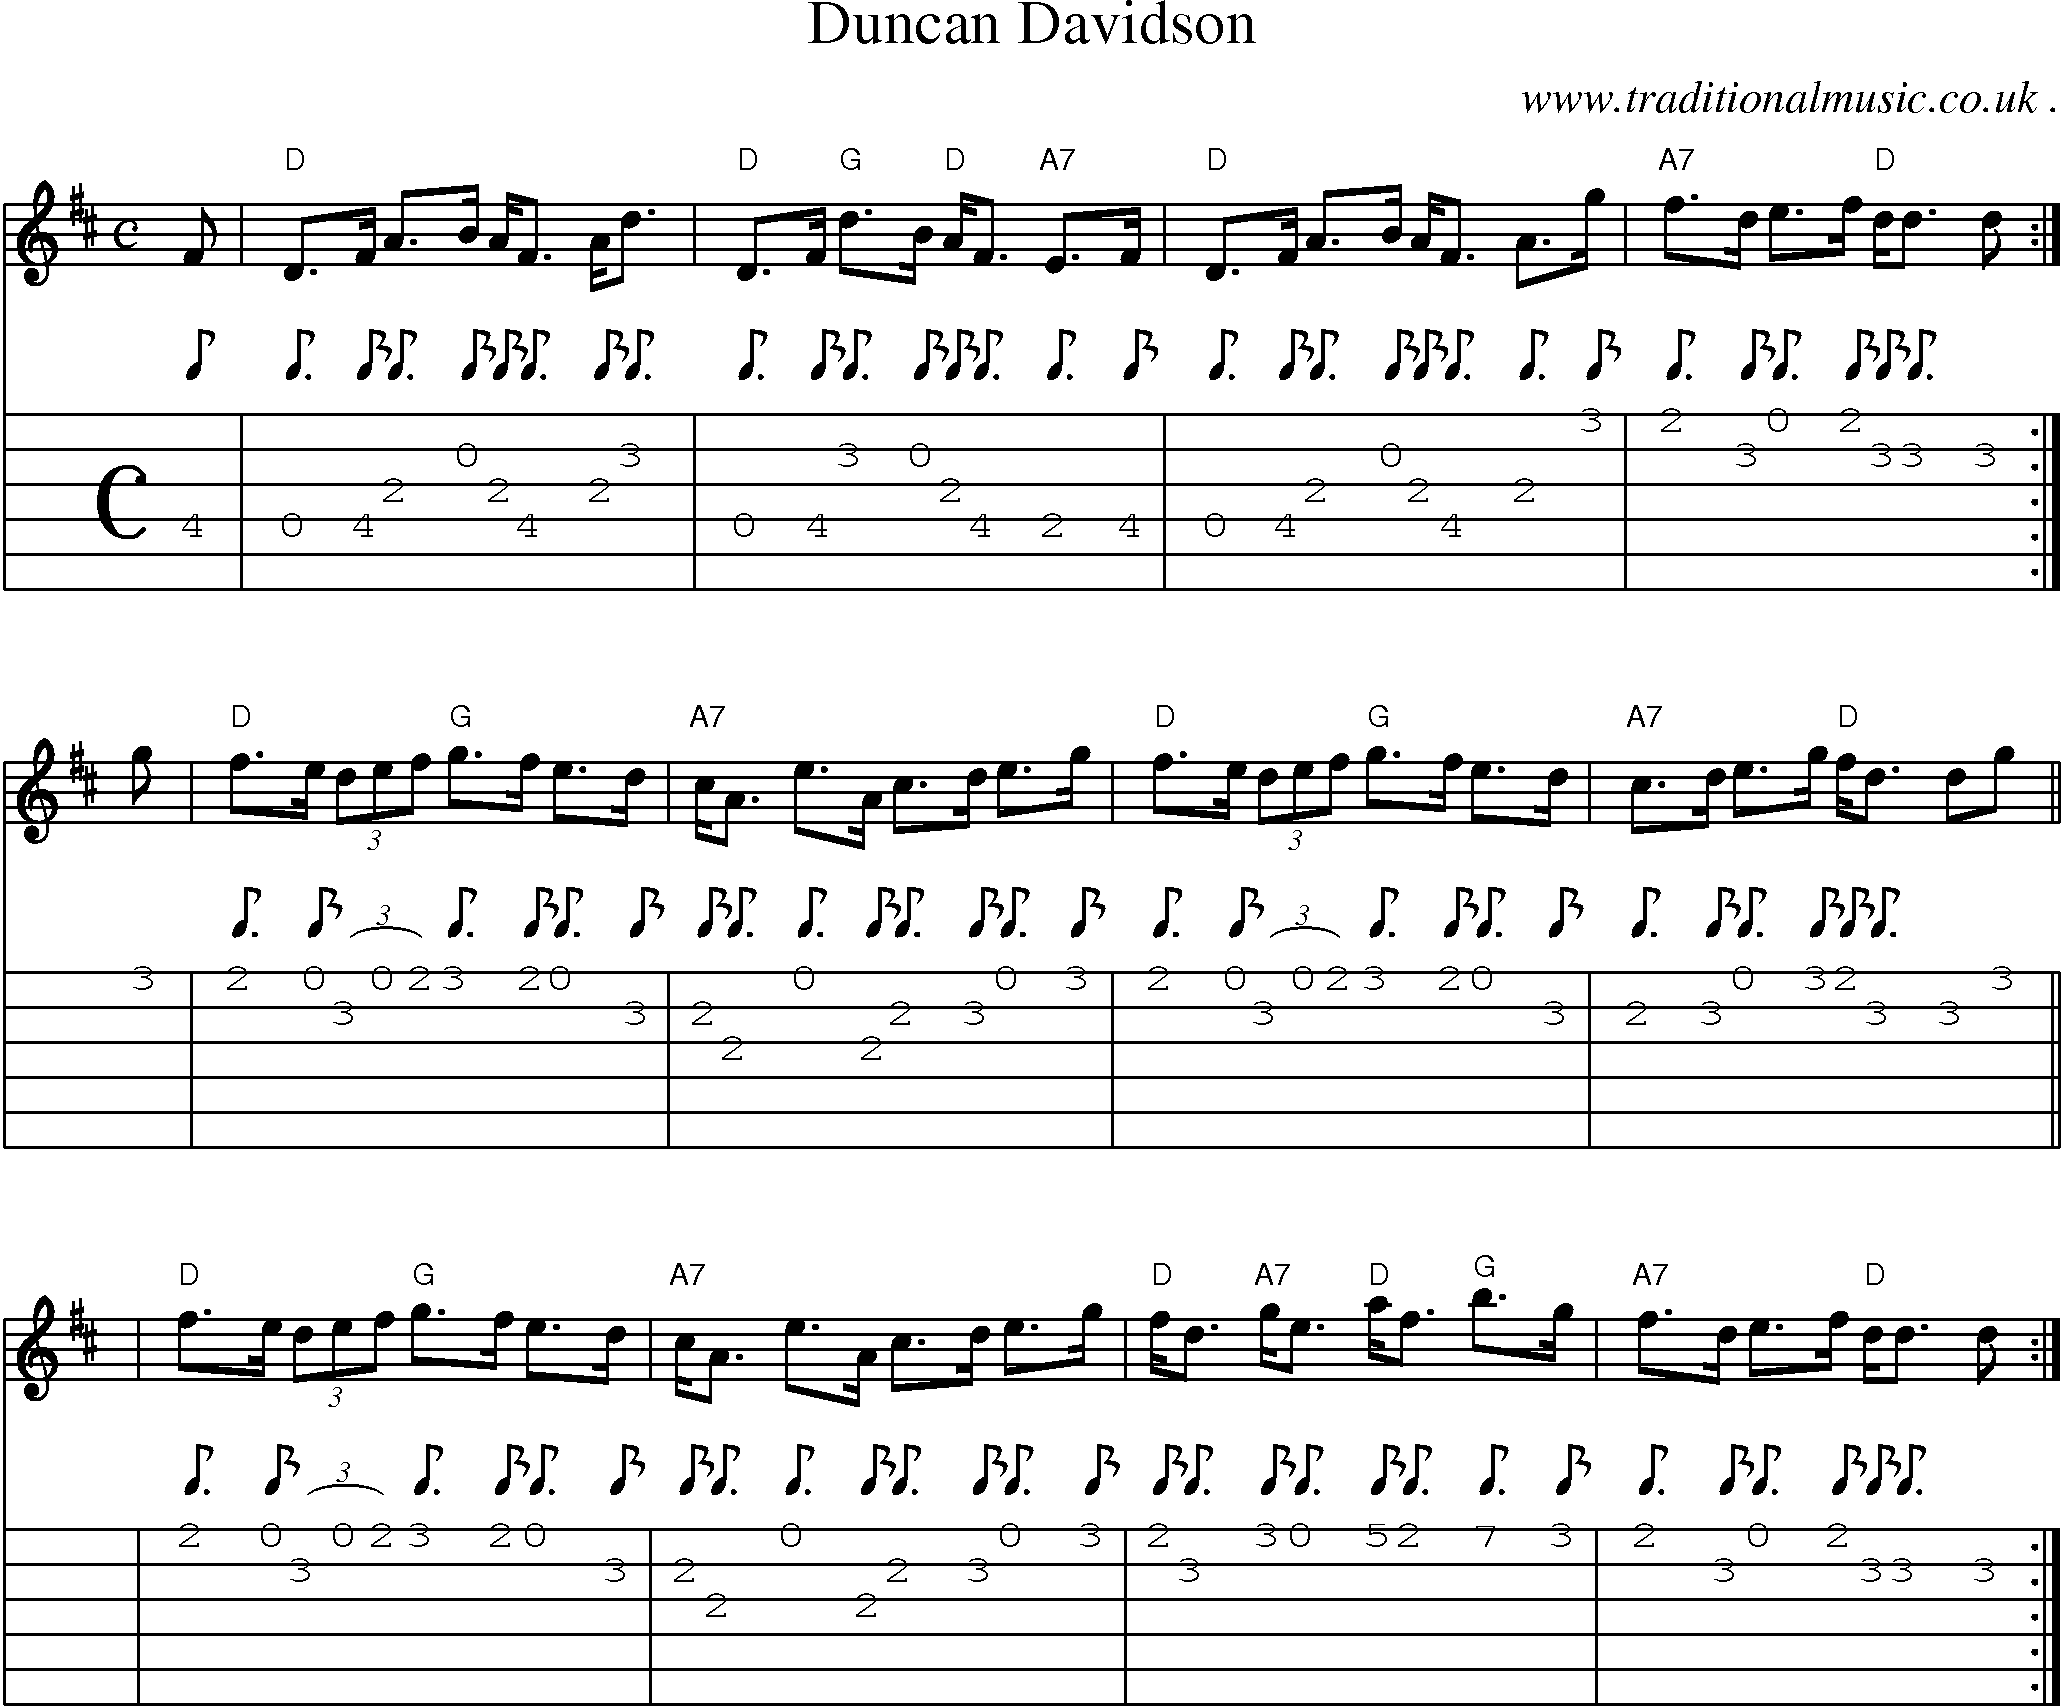 Sheet-music  score, Chords and Guitar Tabs for Duncan Davidson